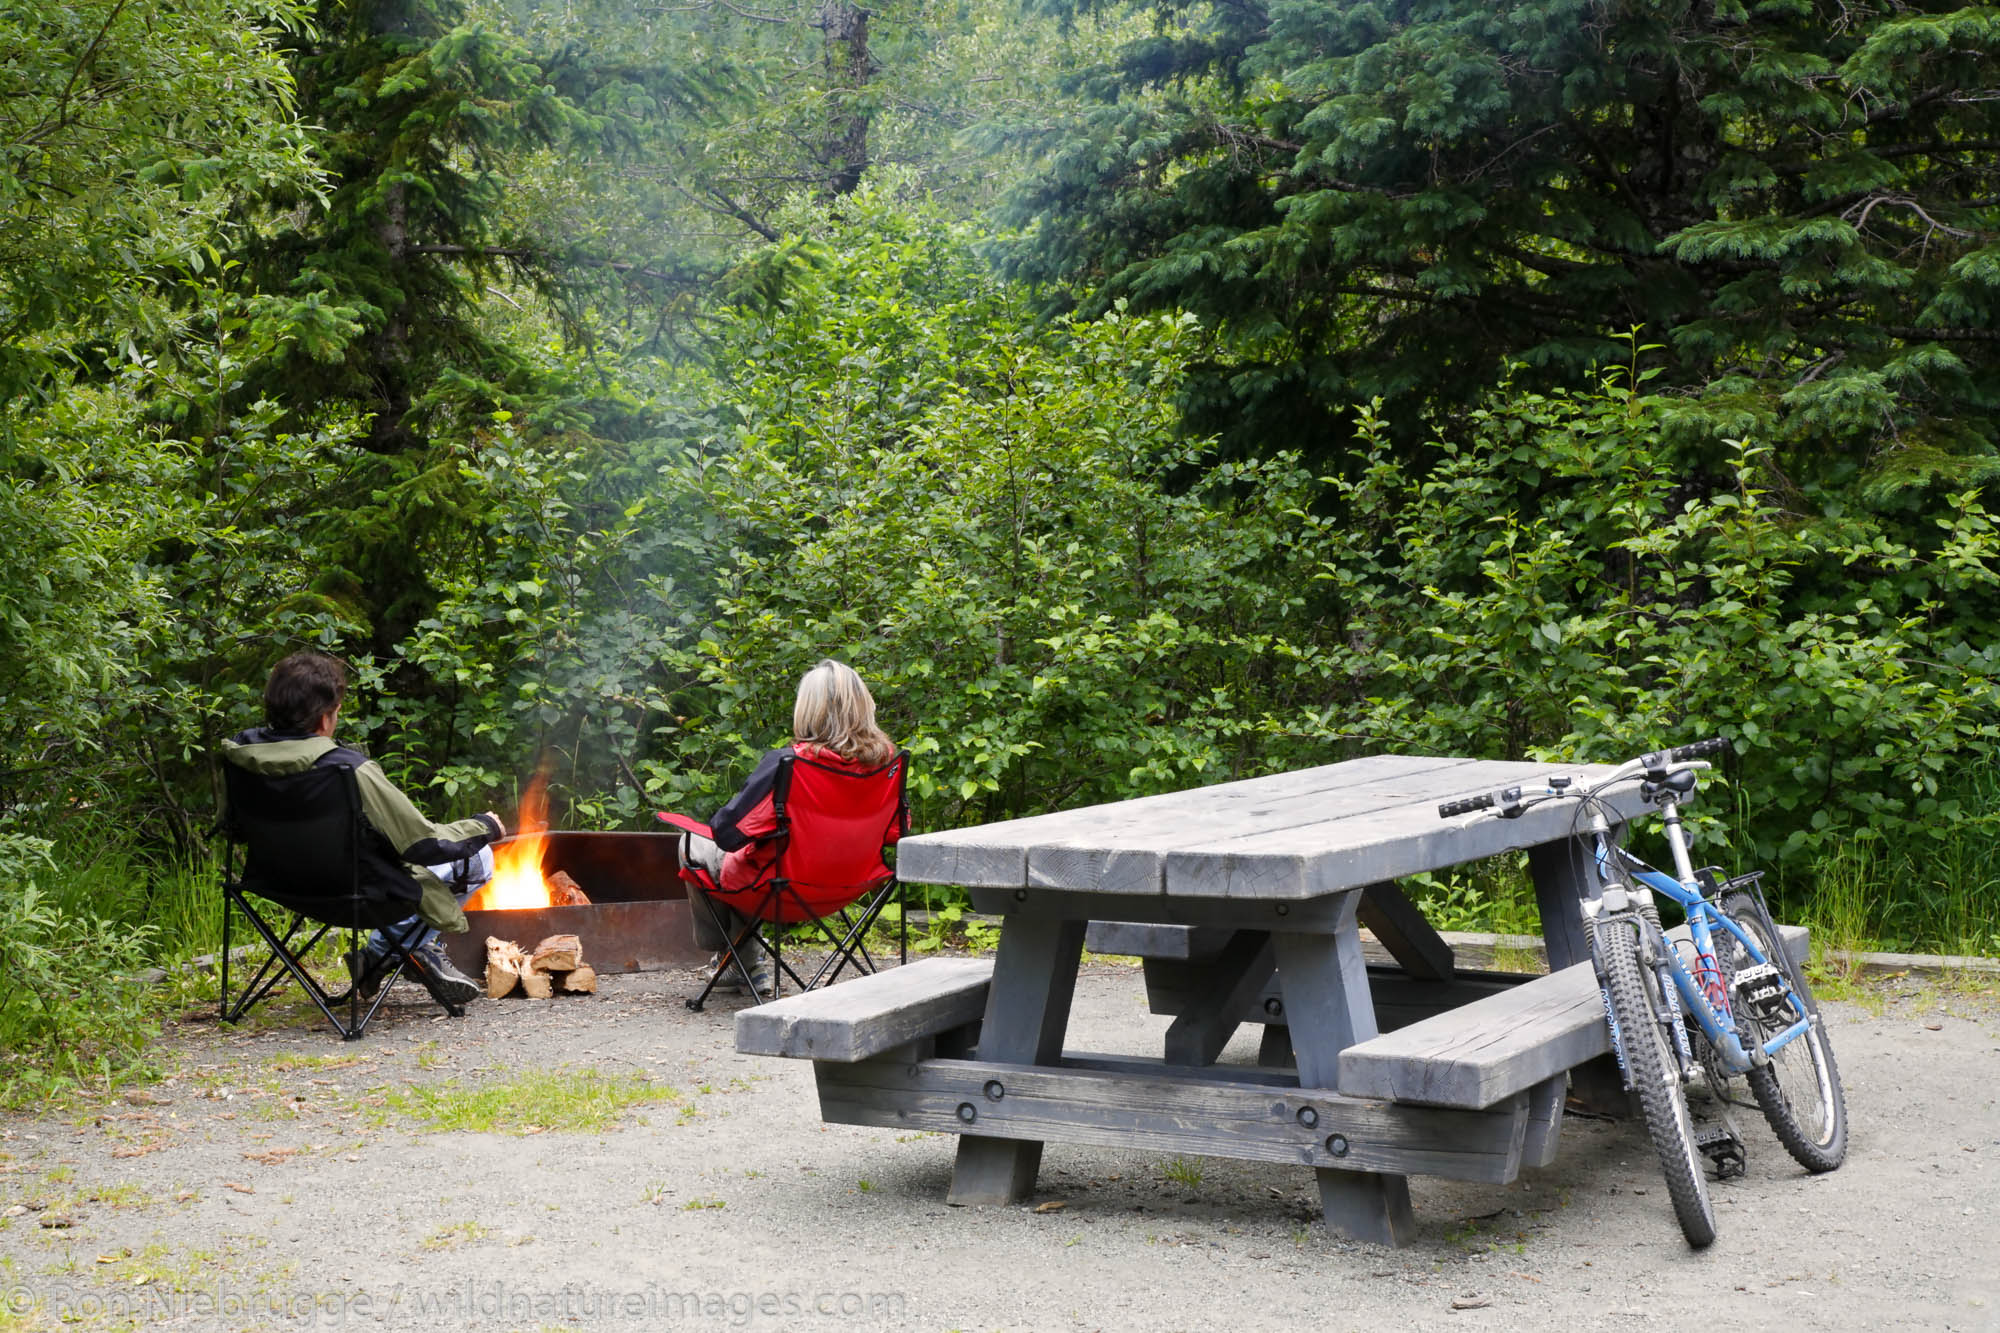 Camping at Williwaw Campground, Portage Valley, Chugach National Forest, Alaska. (MR)